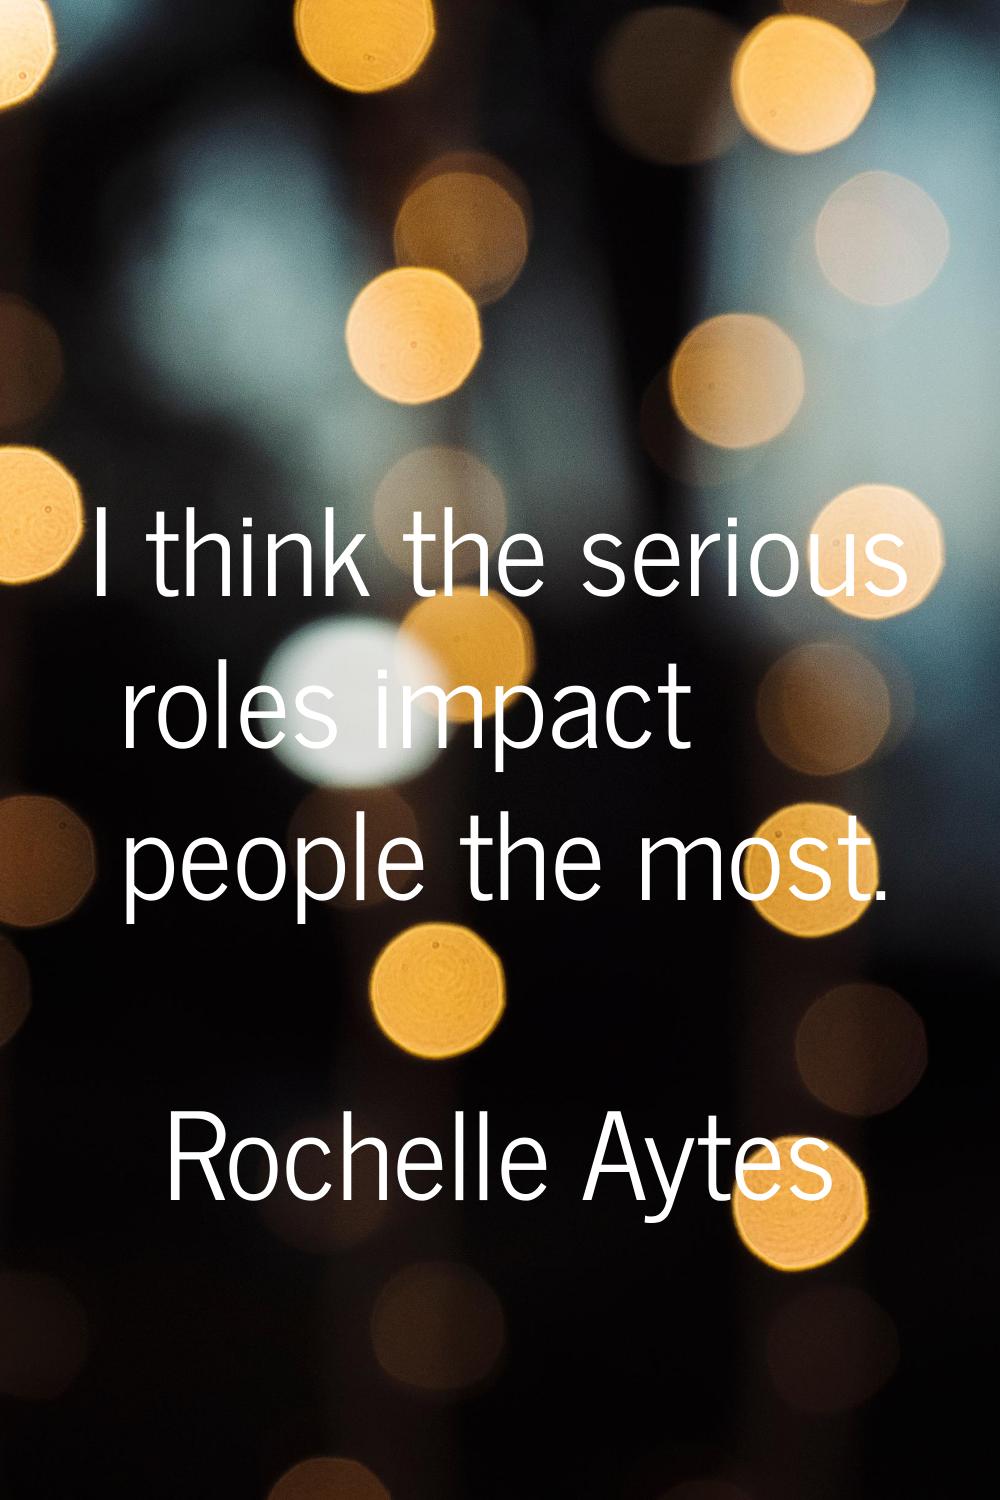 I think the serious roles impact people the most.